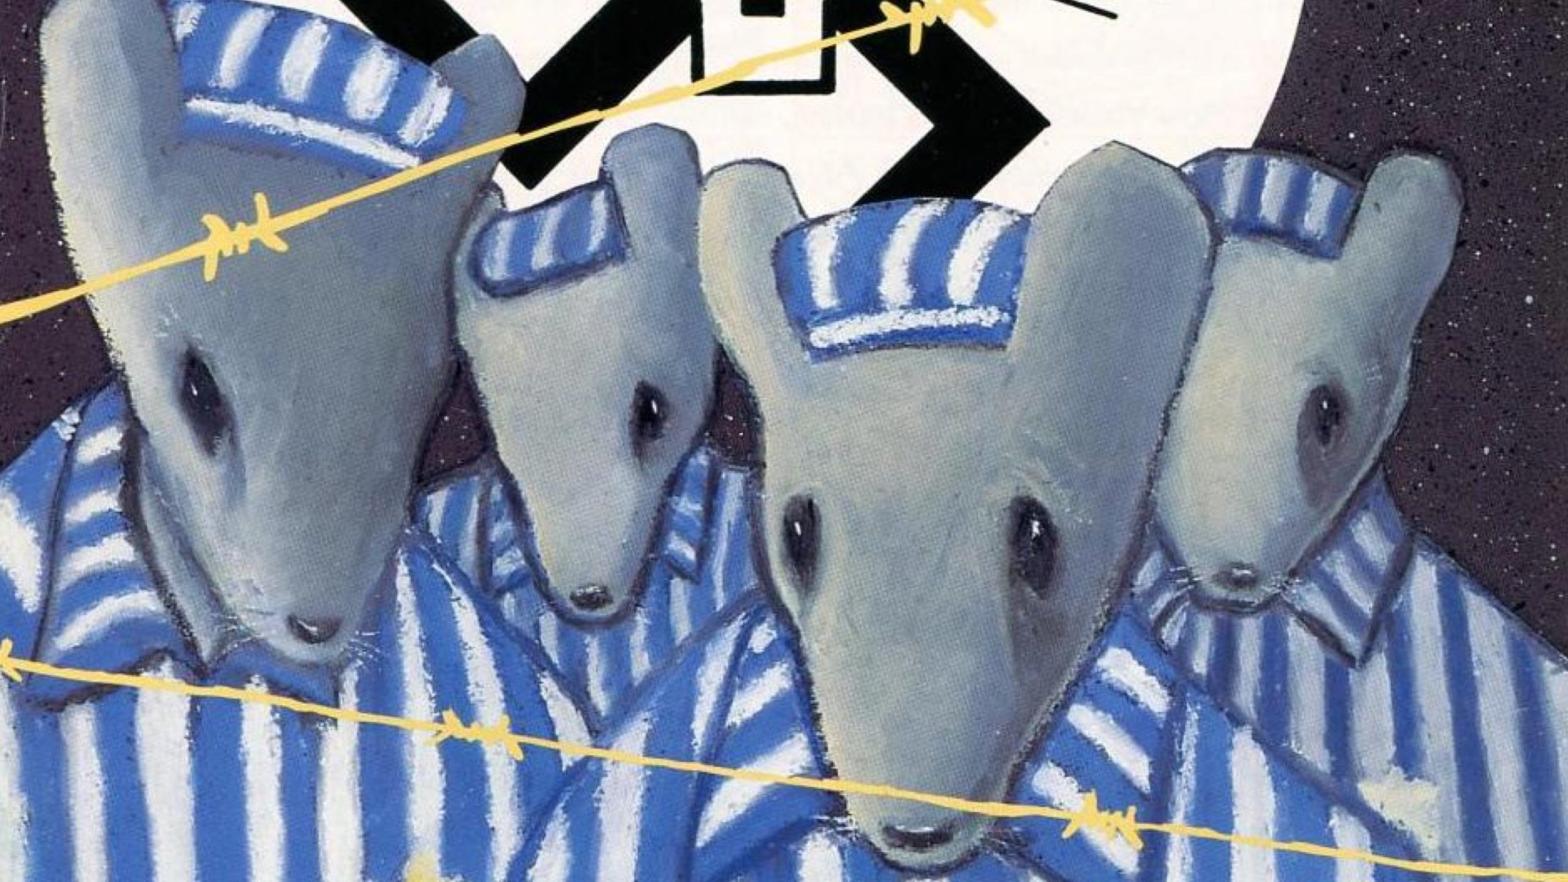 Inset of Maus Vol. II: And Here M Troubles Began cover by Art Spiegelman. (Image: Pantheon Books)